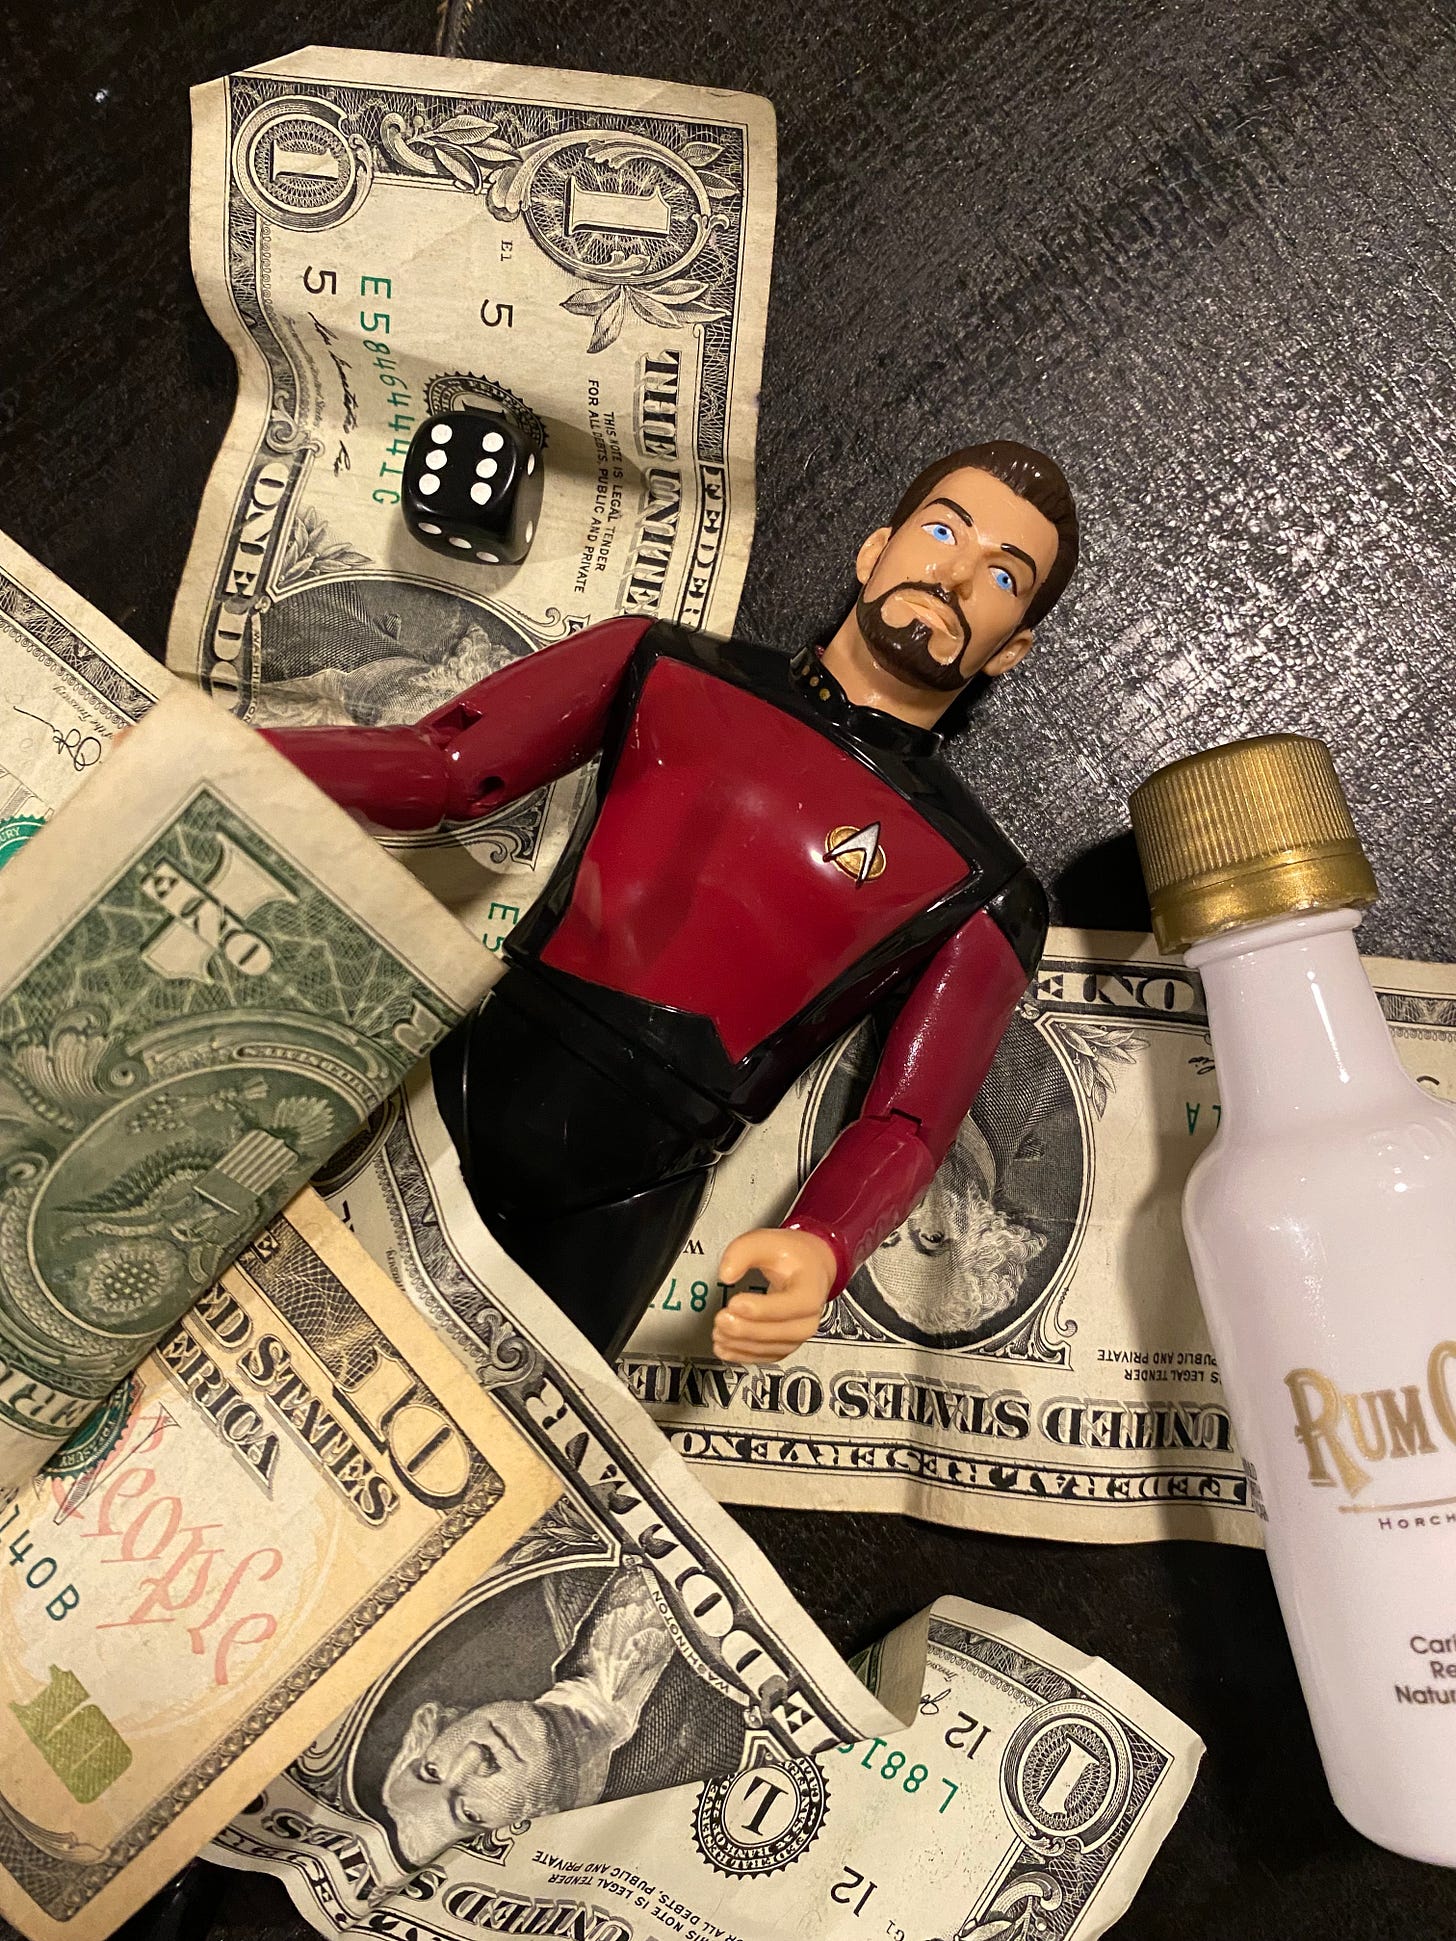 Little Riker with money, booze, and dice